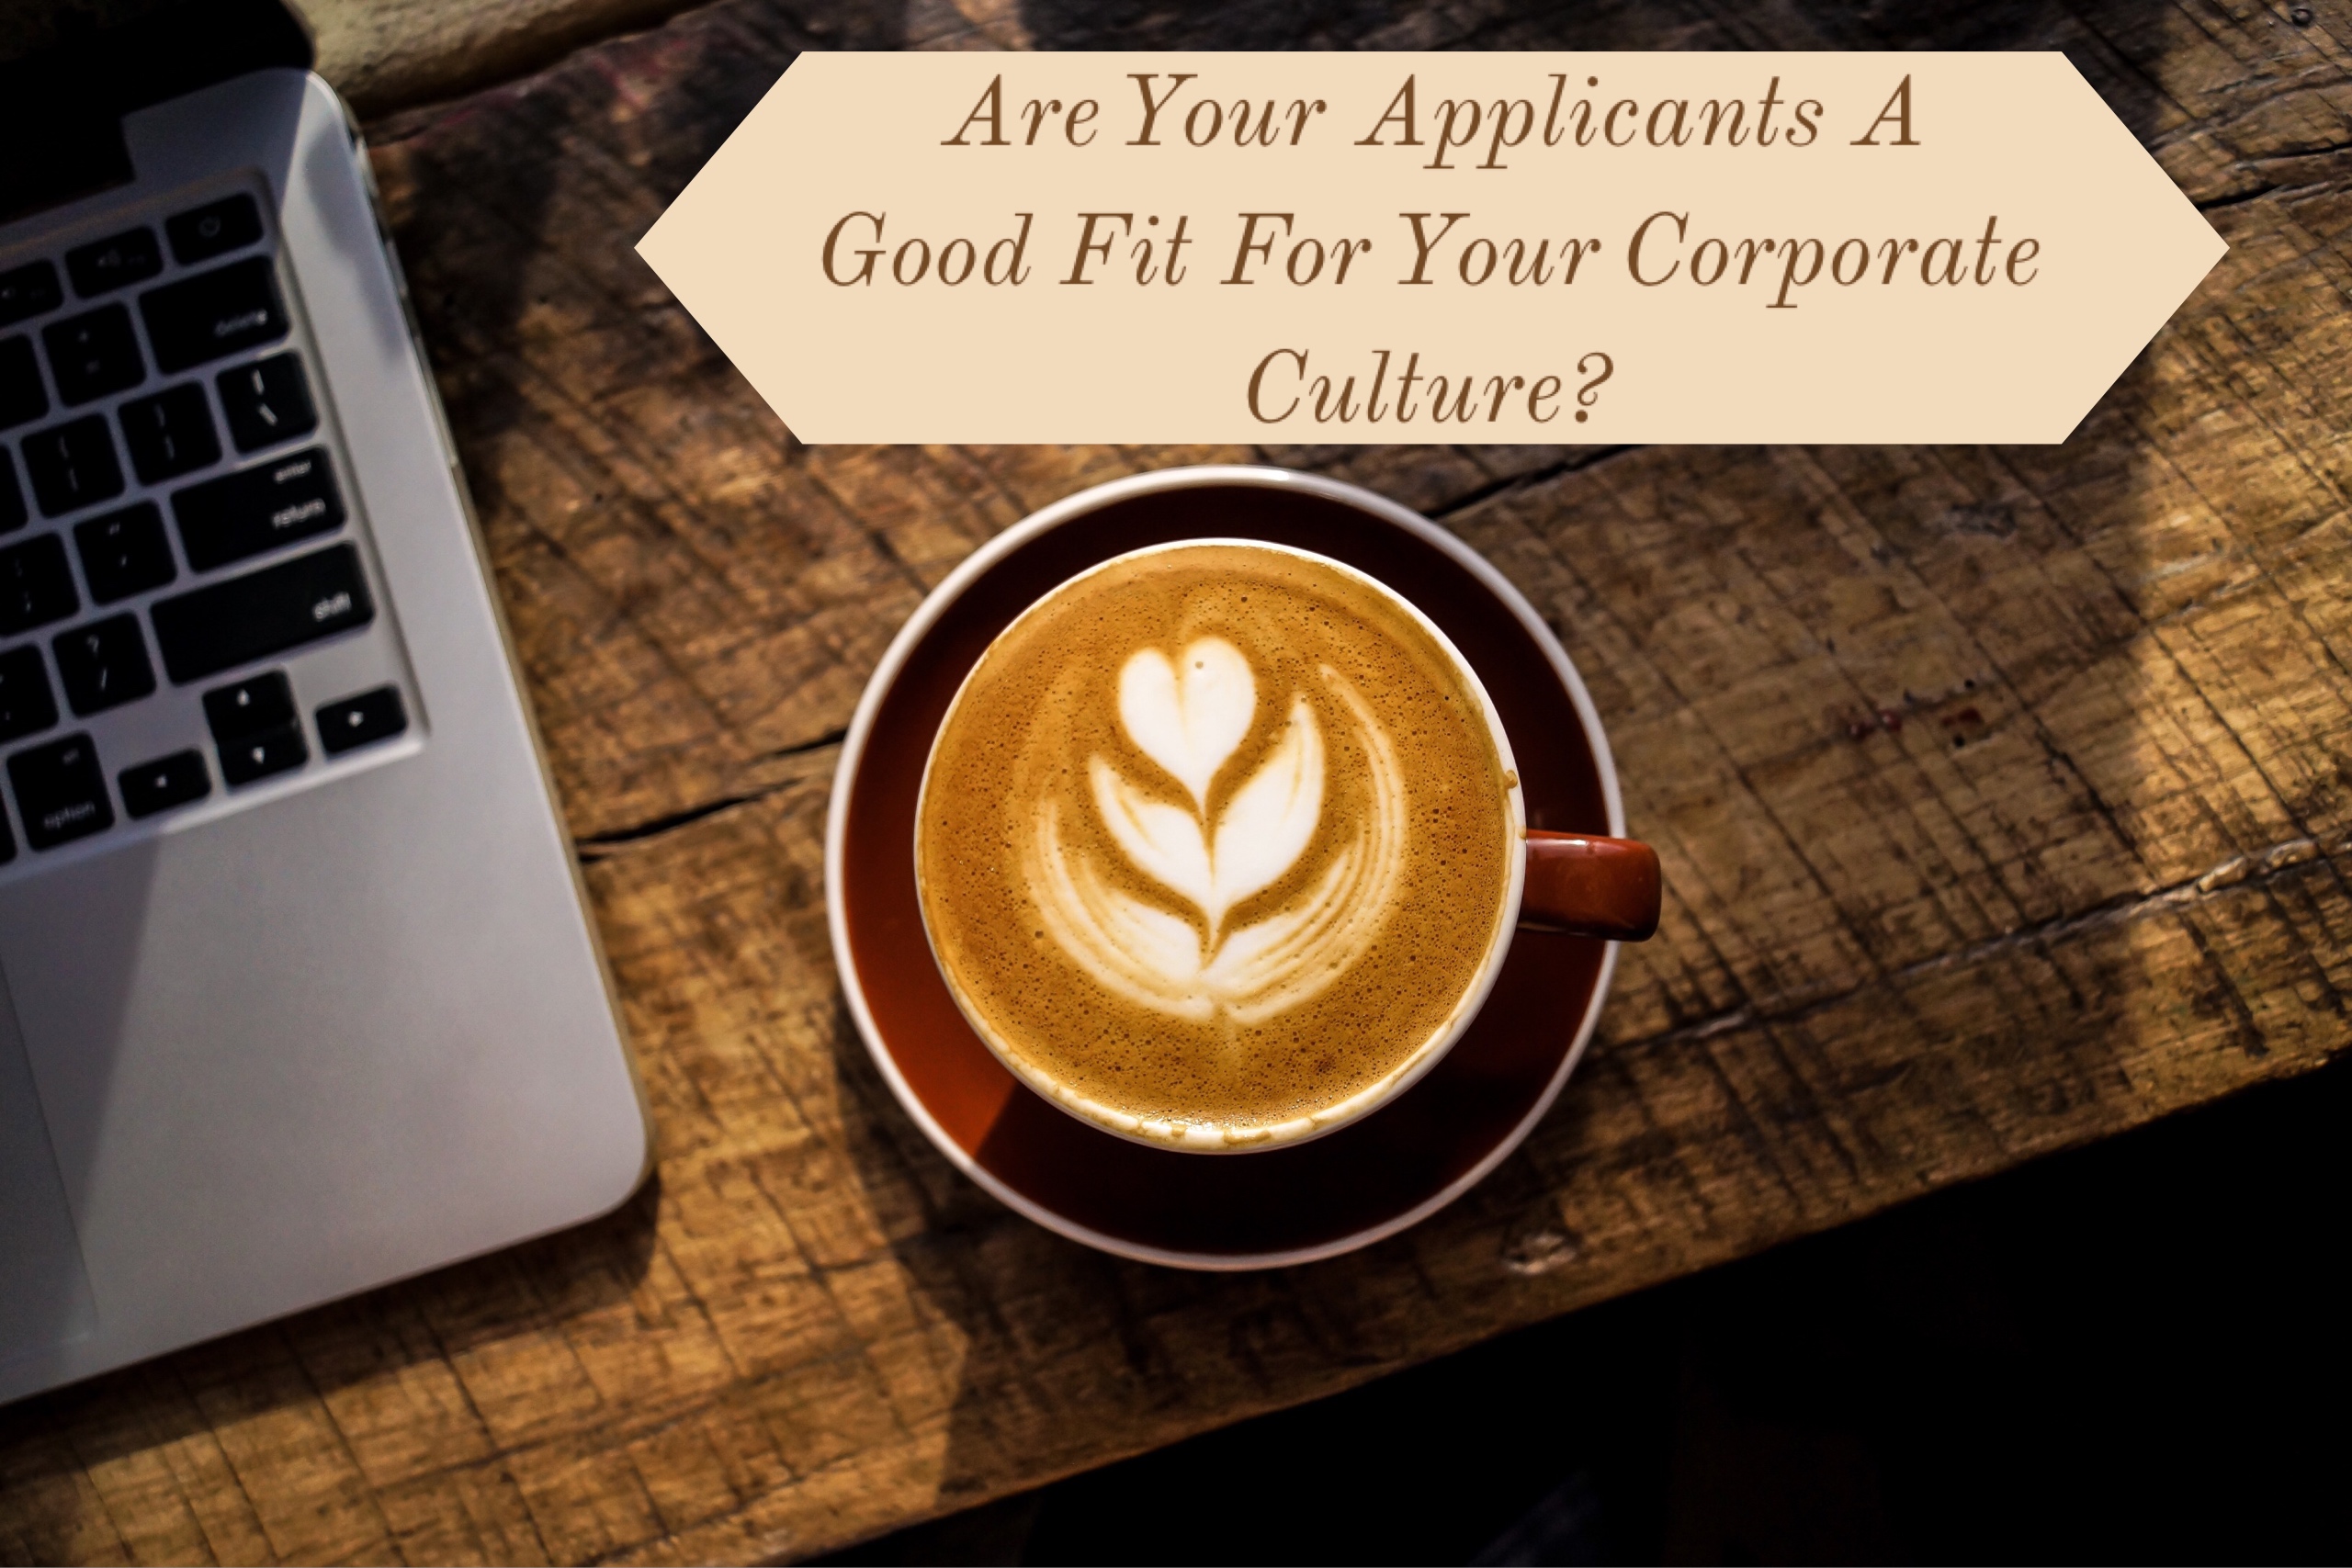 Are Your Applicants a Good Fit for Your Corporate Culture?